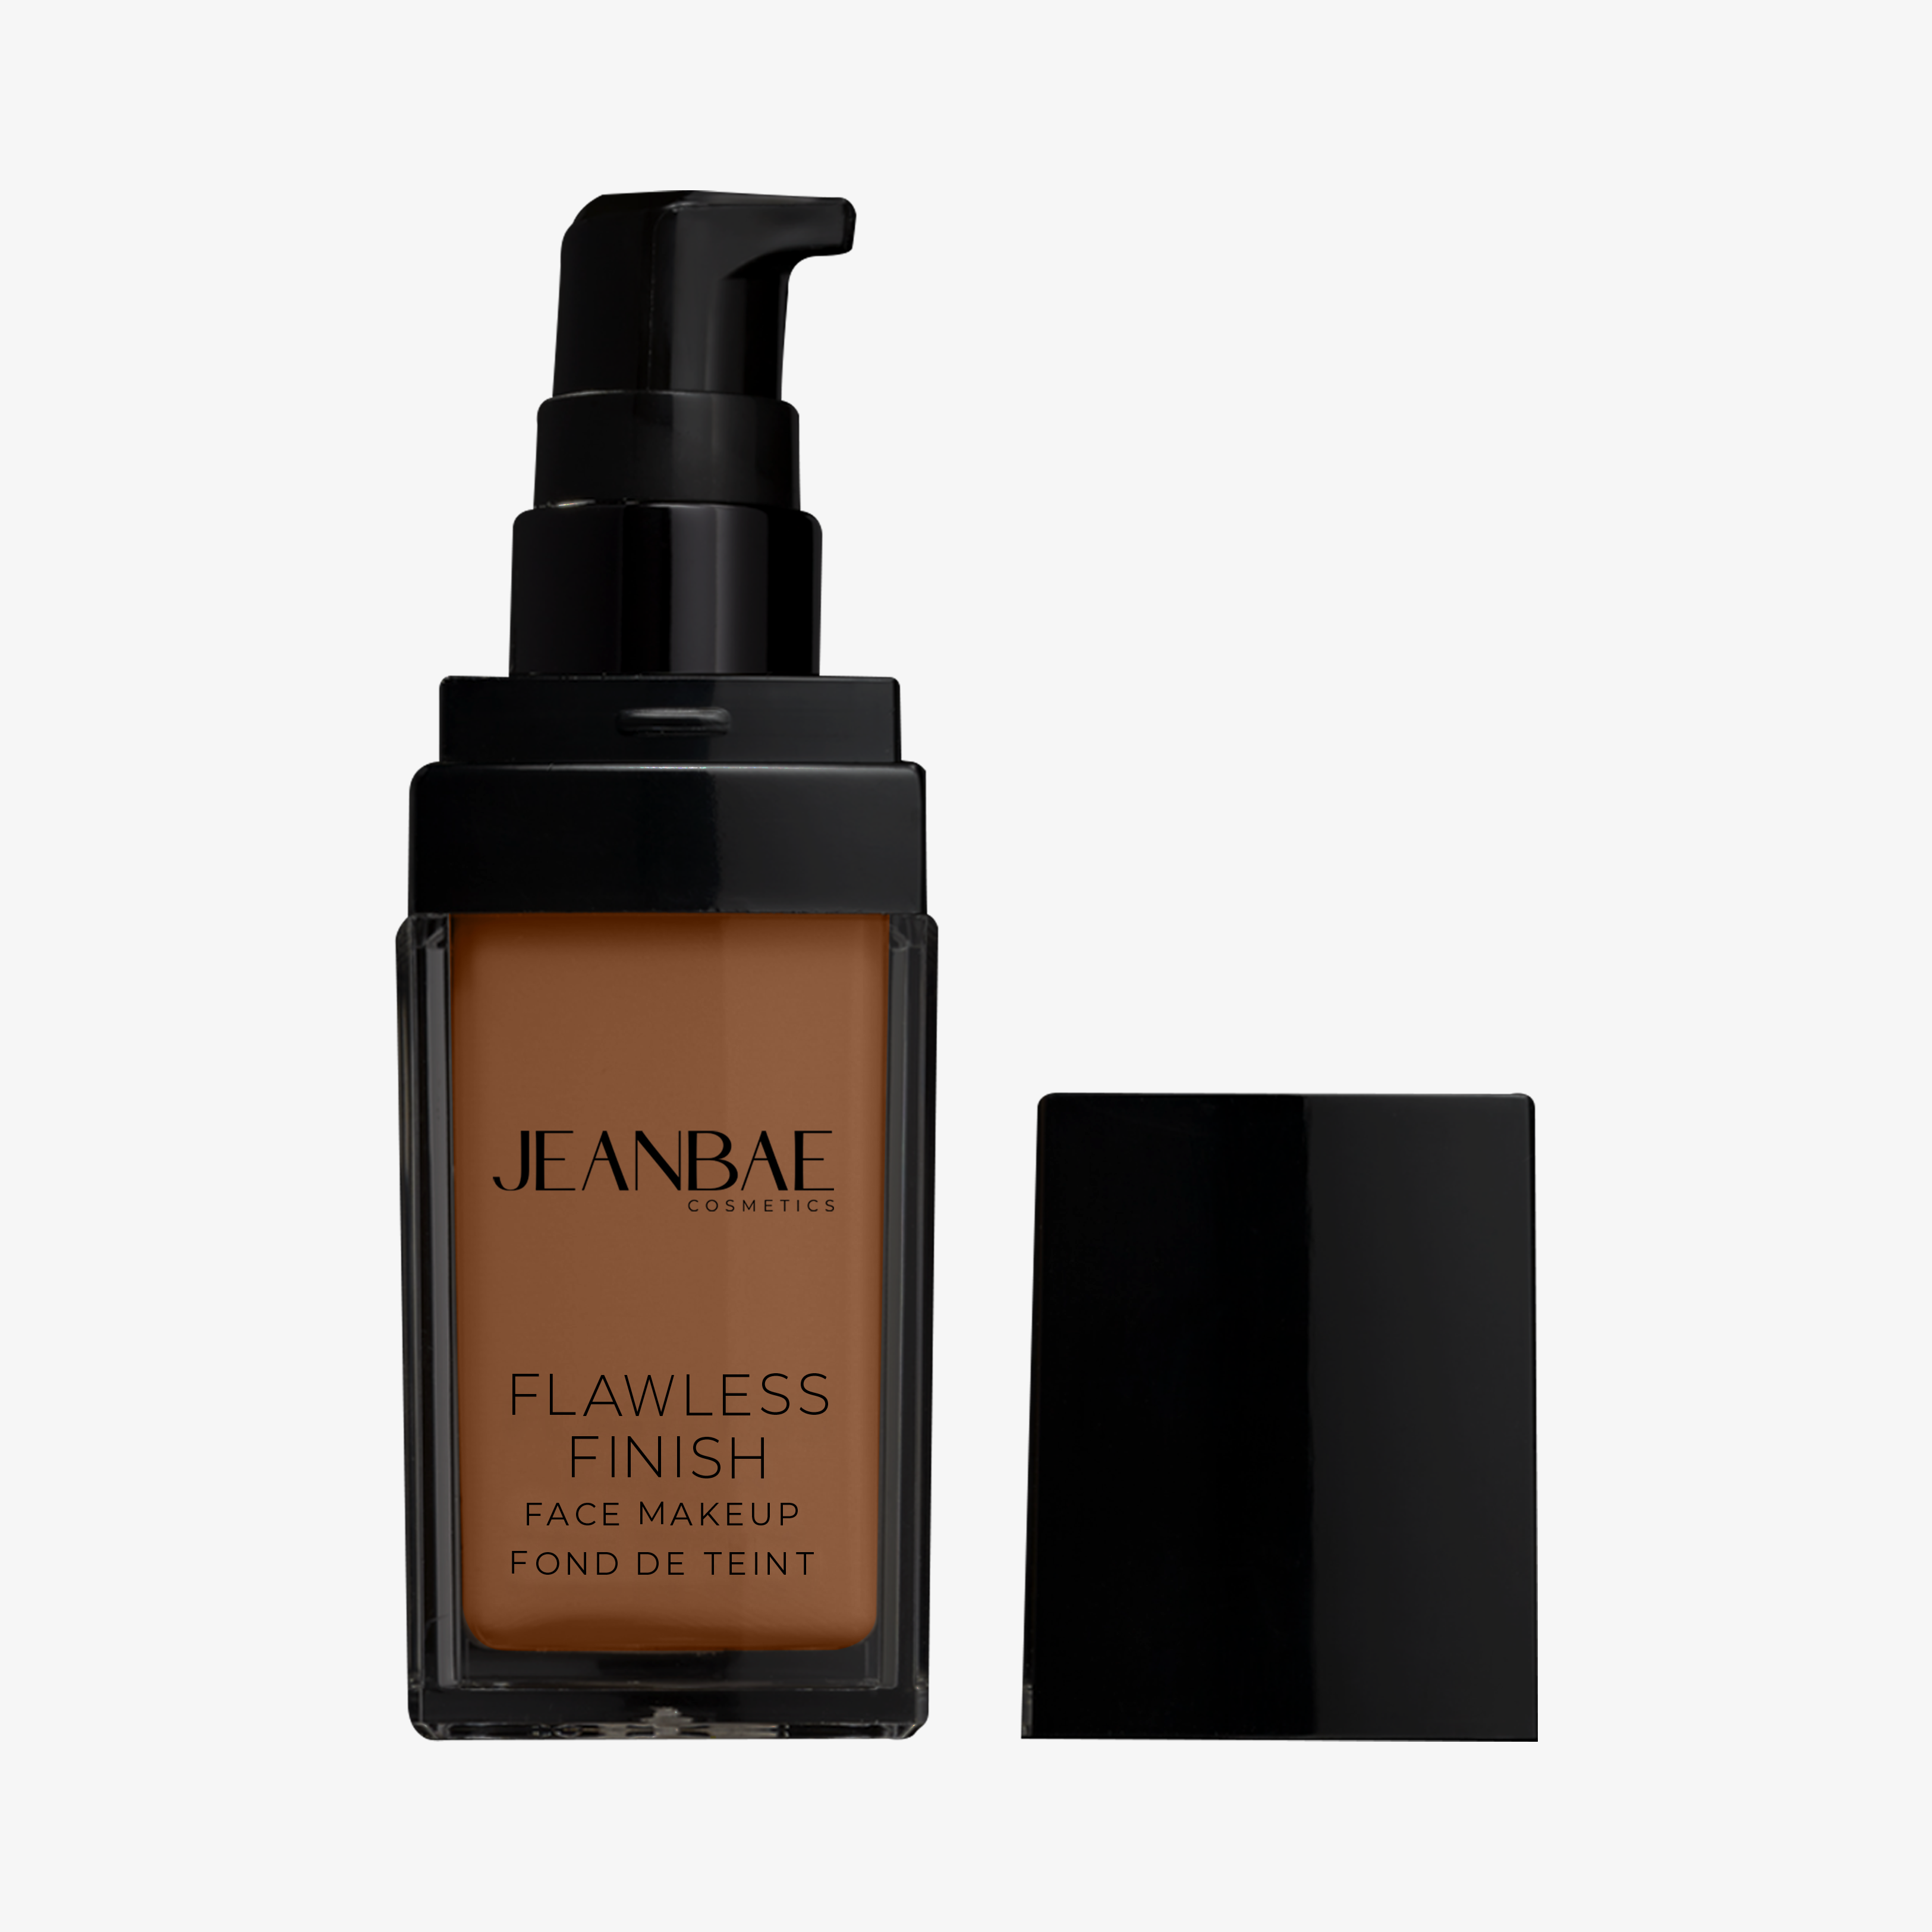 Achieve a flawless and polished look with our water-based liquid foundation, resulting in a perfectly comfortable matte finish. THIS PRODUCT IS Cruelty-Free, Hypoallergenic, Non-Comedogenic, Halal Certified, and EU Compliant. Free of Parabens and Fragrances.